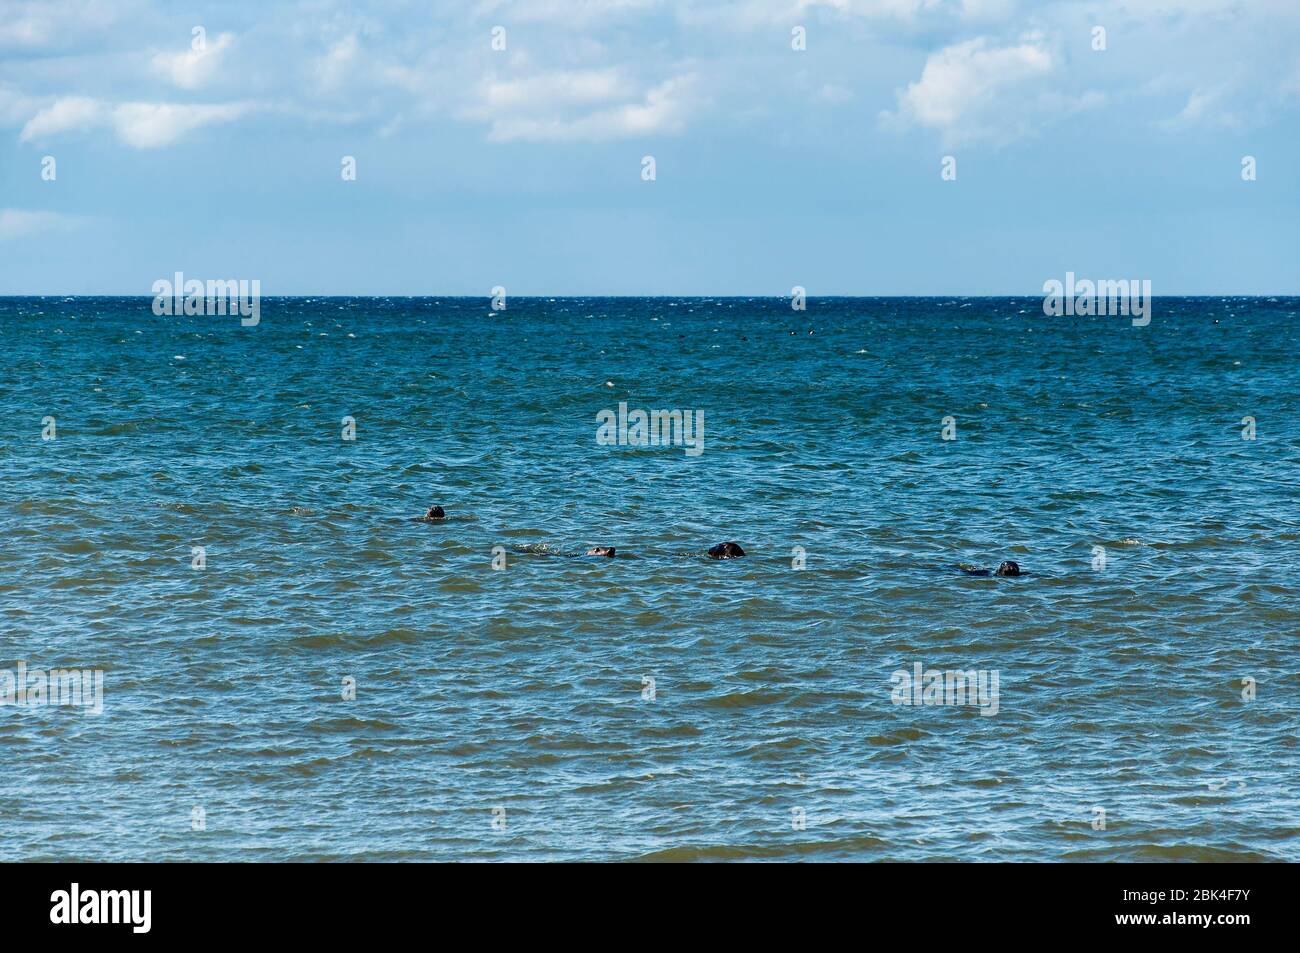 four harbor seals swmming in the atlantic ocean off the coast of cape cod massachusetts on a sunny day. Stock Photo